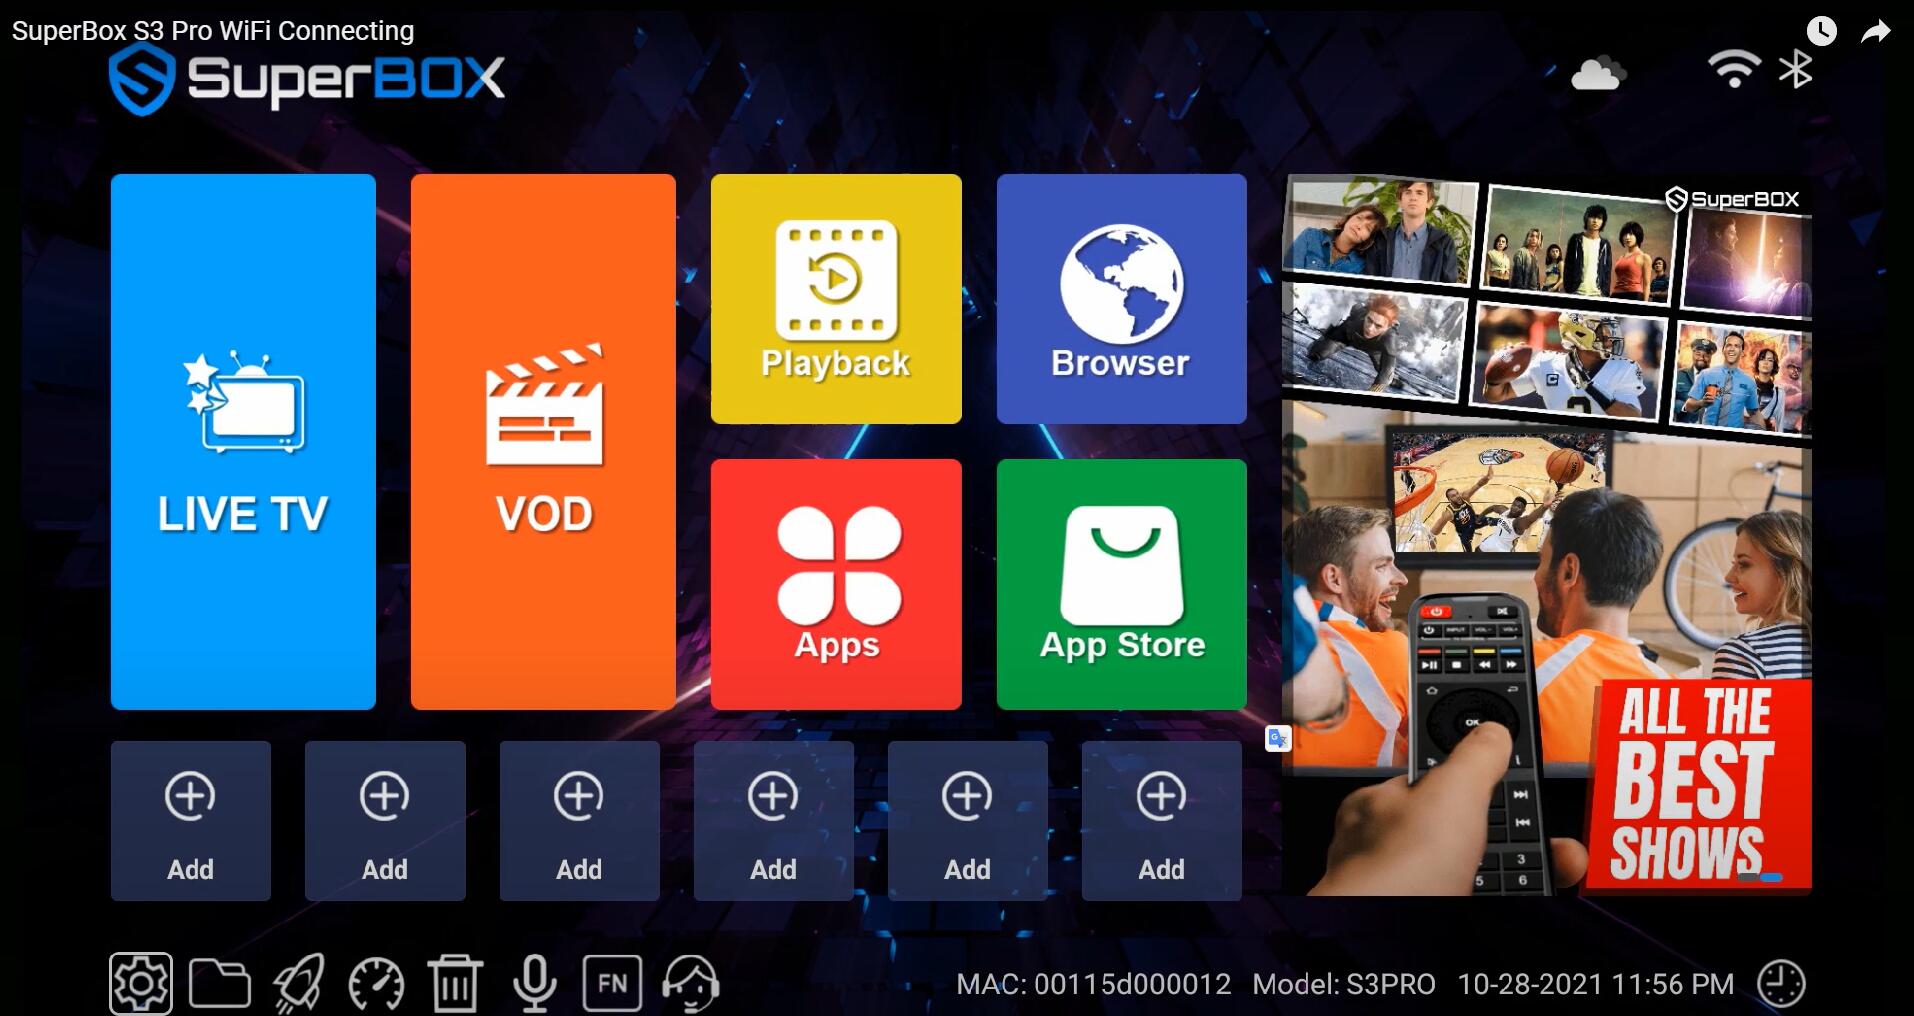 How to connect WiFi for SuperBox IPTV Box?